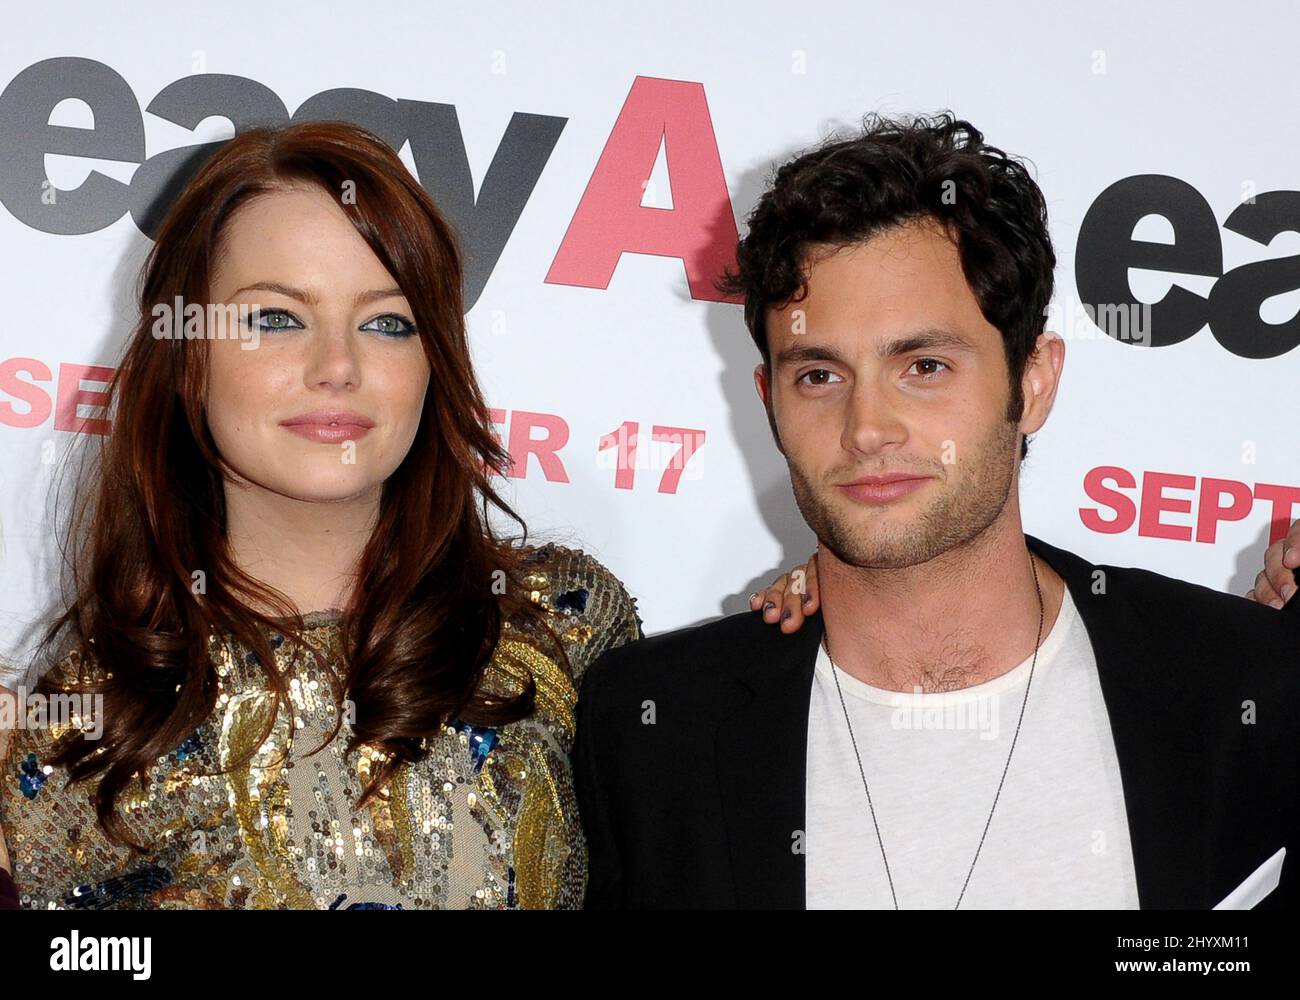 Emma Stone and Penn Badgley at the 'Easy A' premiere, held at Grauman's  Chinese Theatre, Los Angeles Stock Photo - Alamy